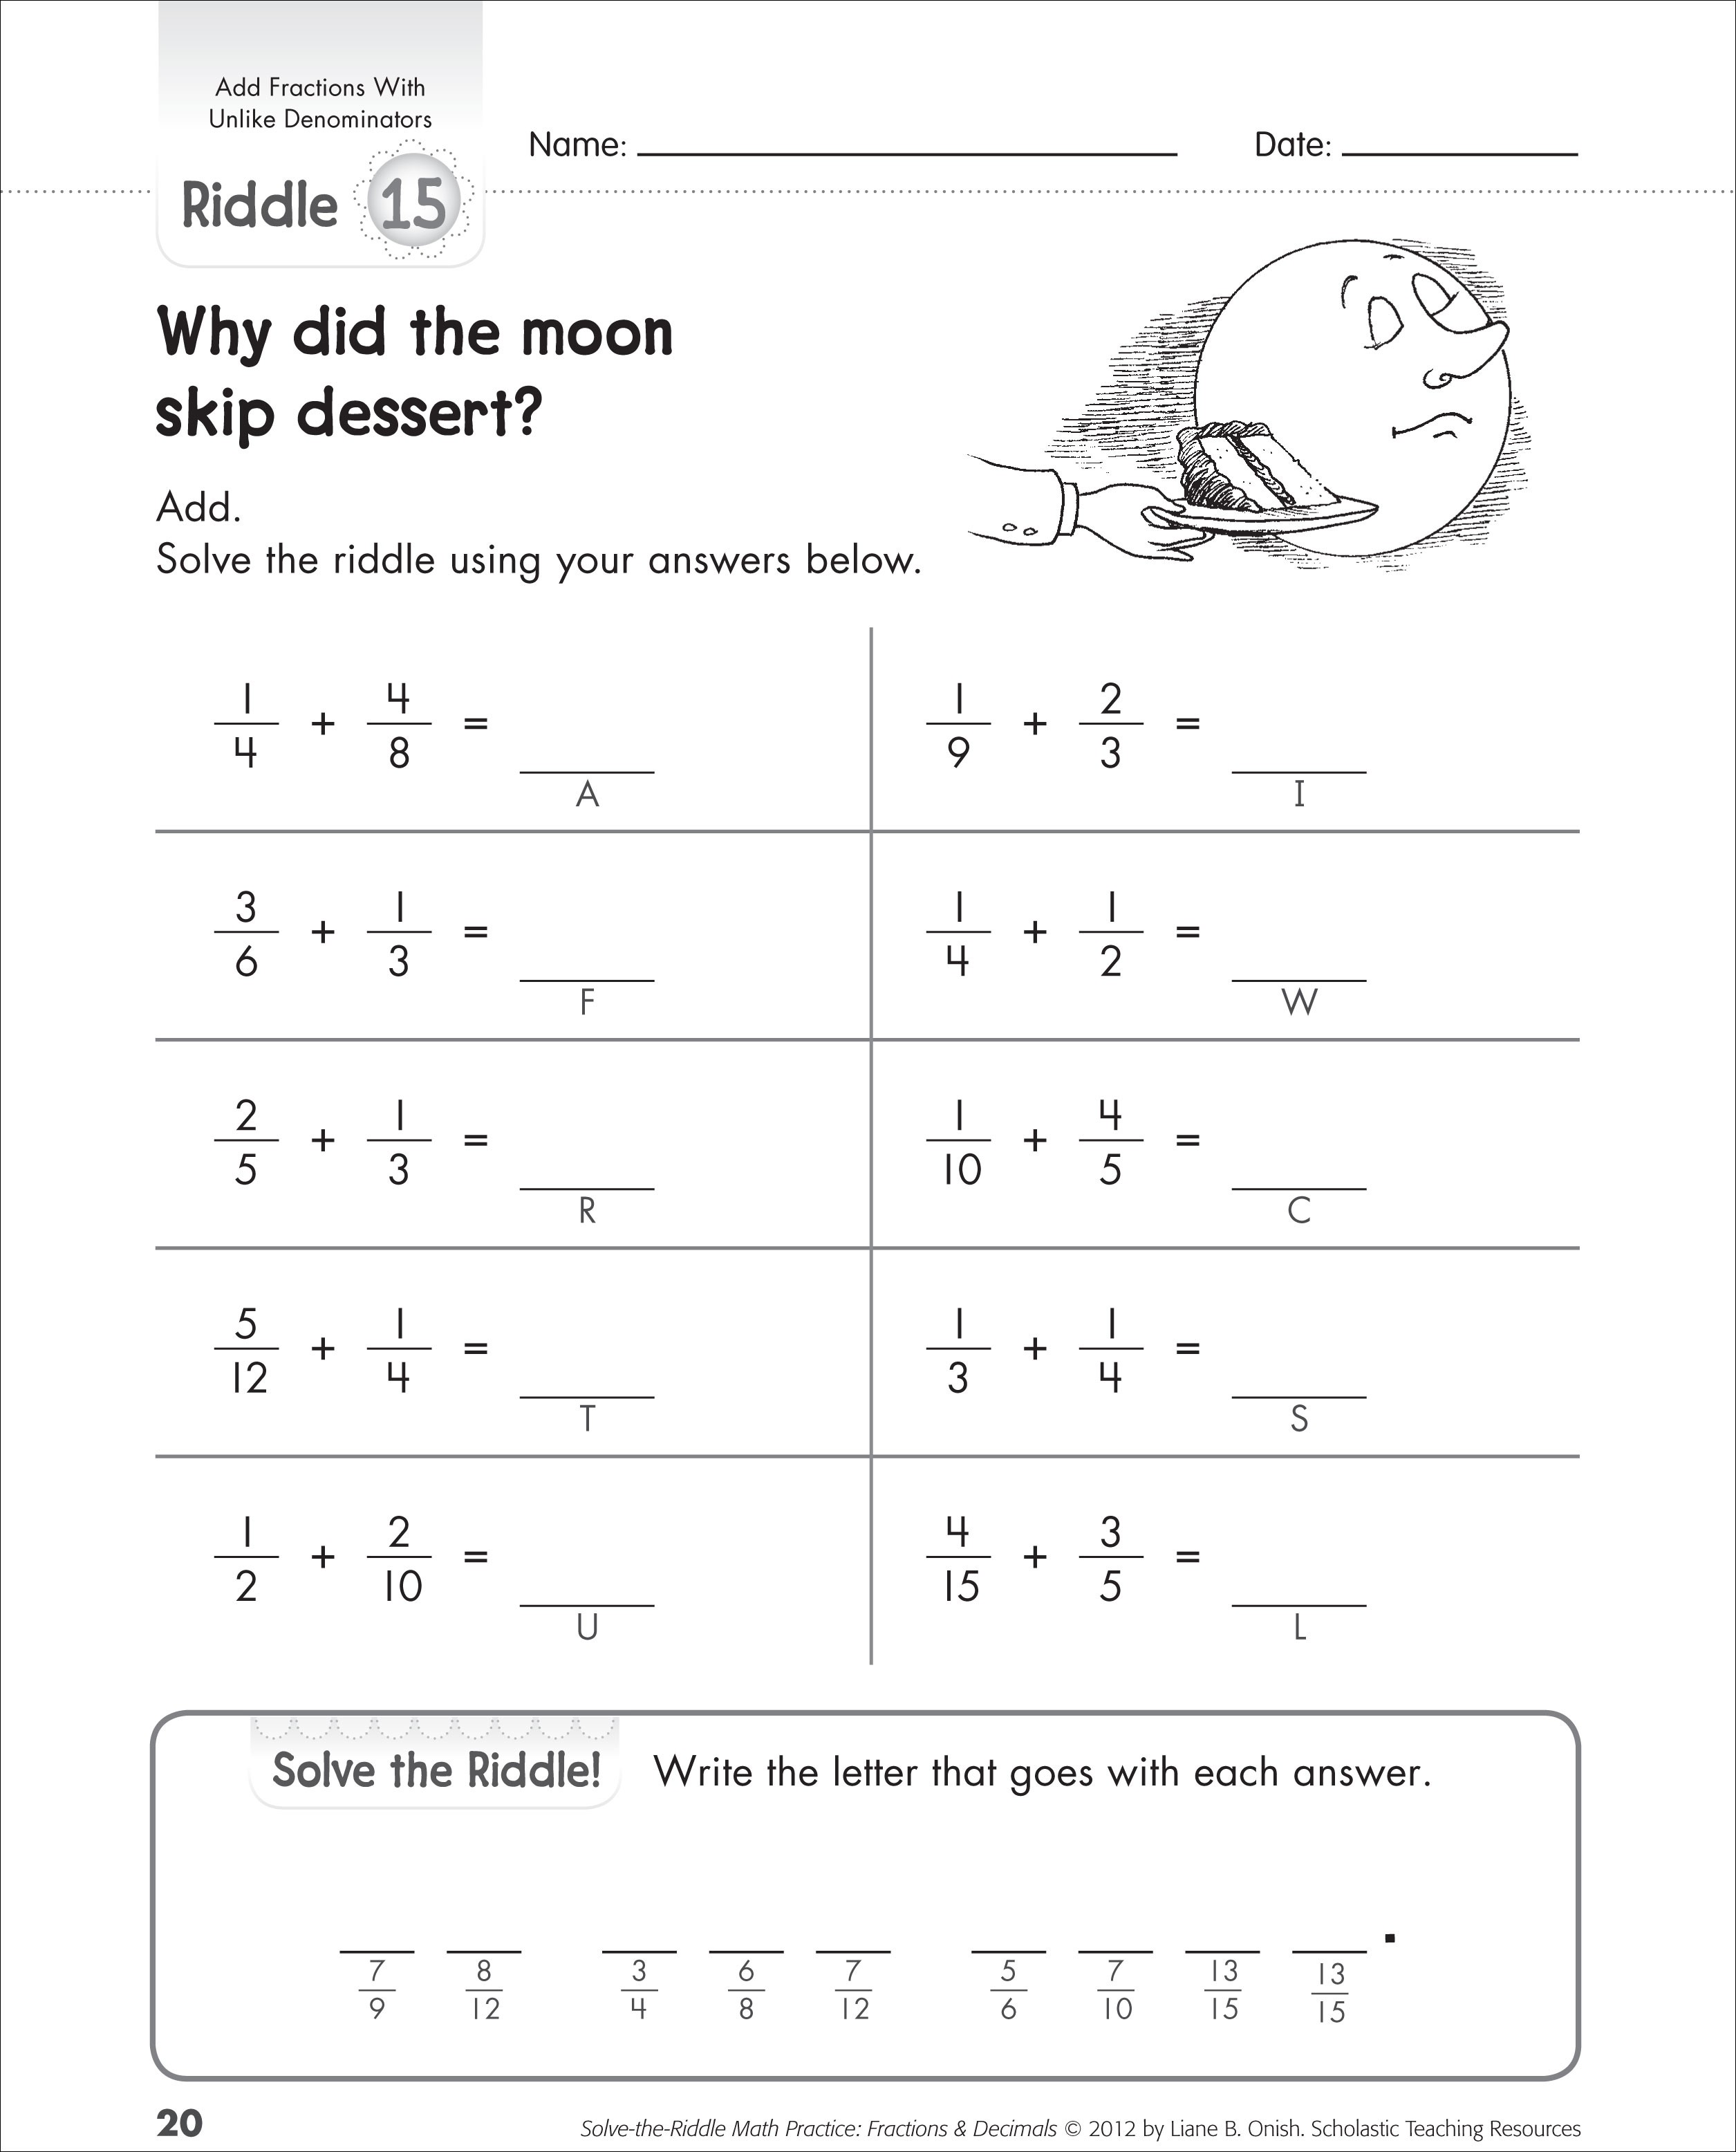 10 Best Images of Adding Fractions Worksheets With Answer ...